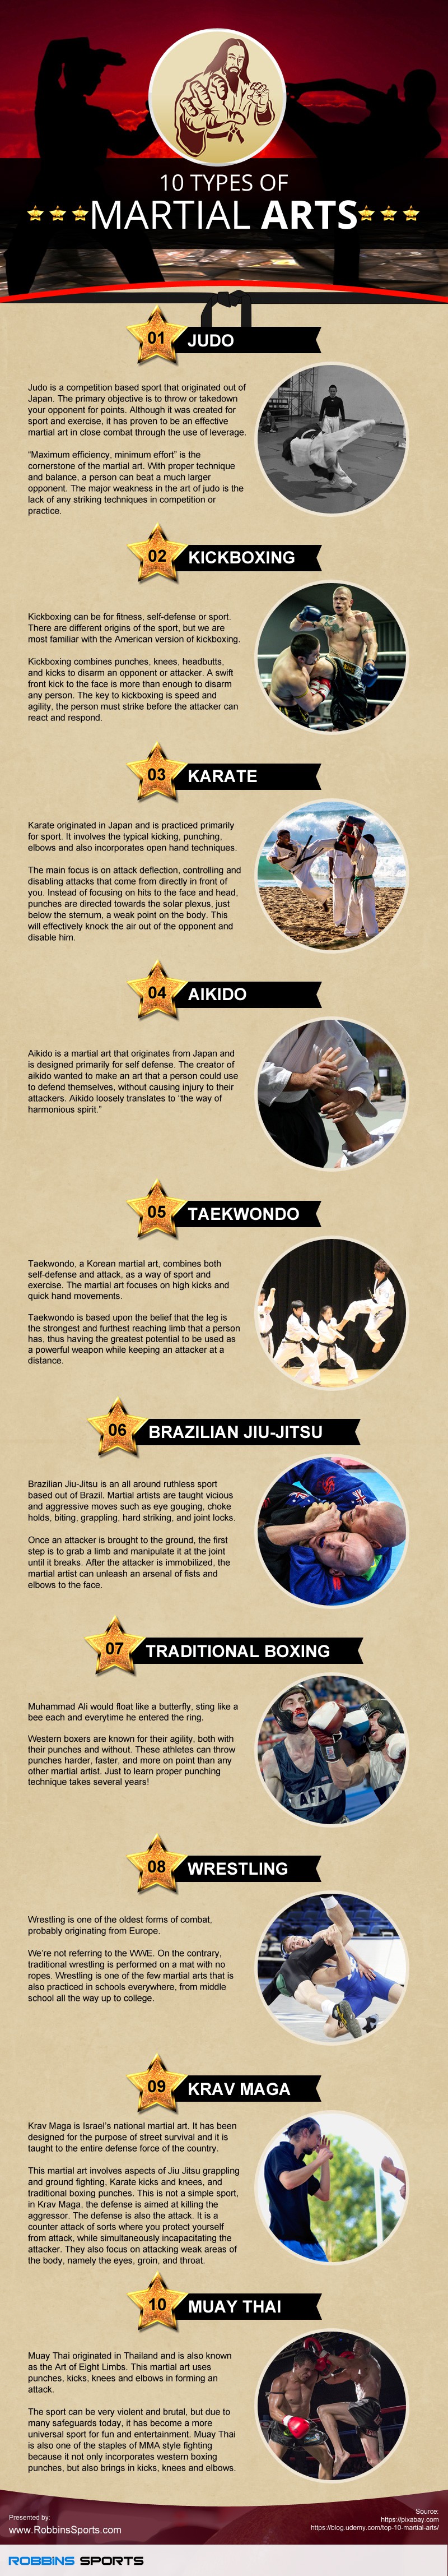 10 Types of Martial Arts #Infographic ~ Visualistan